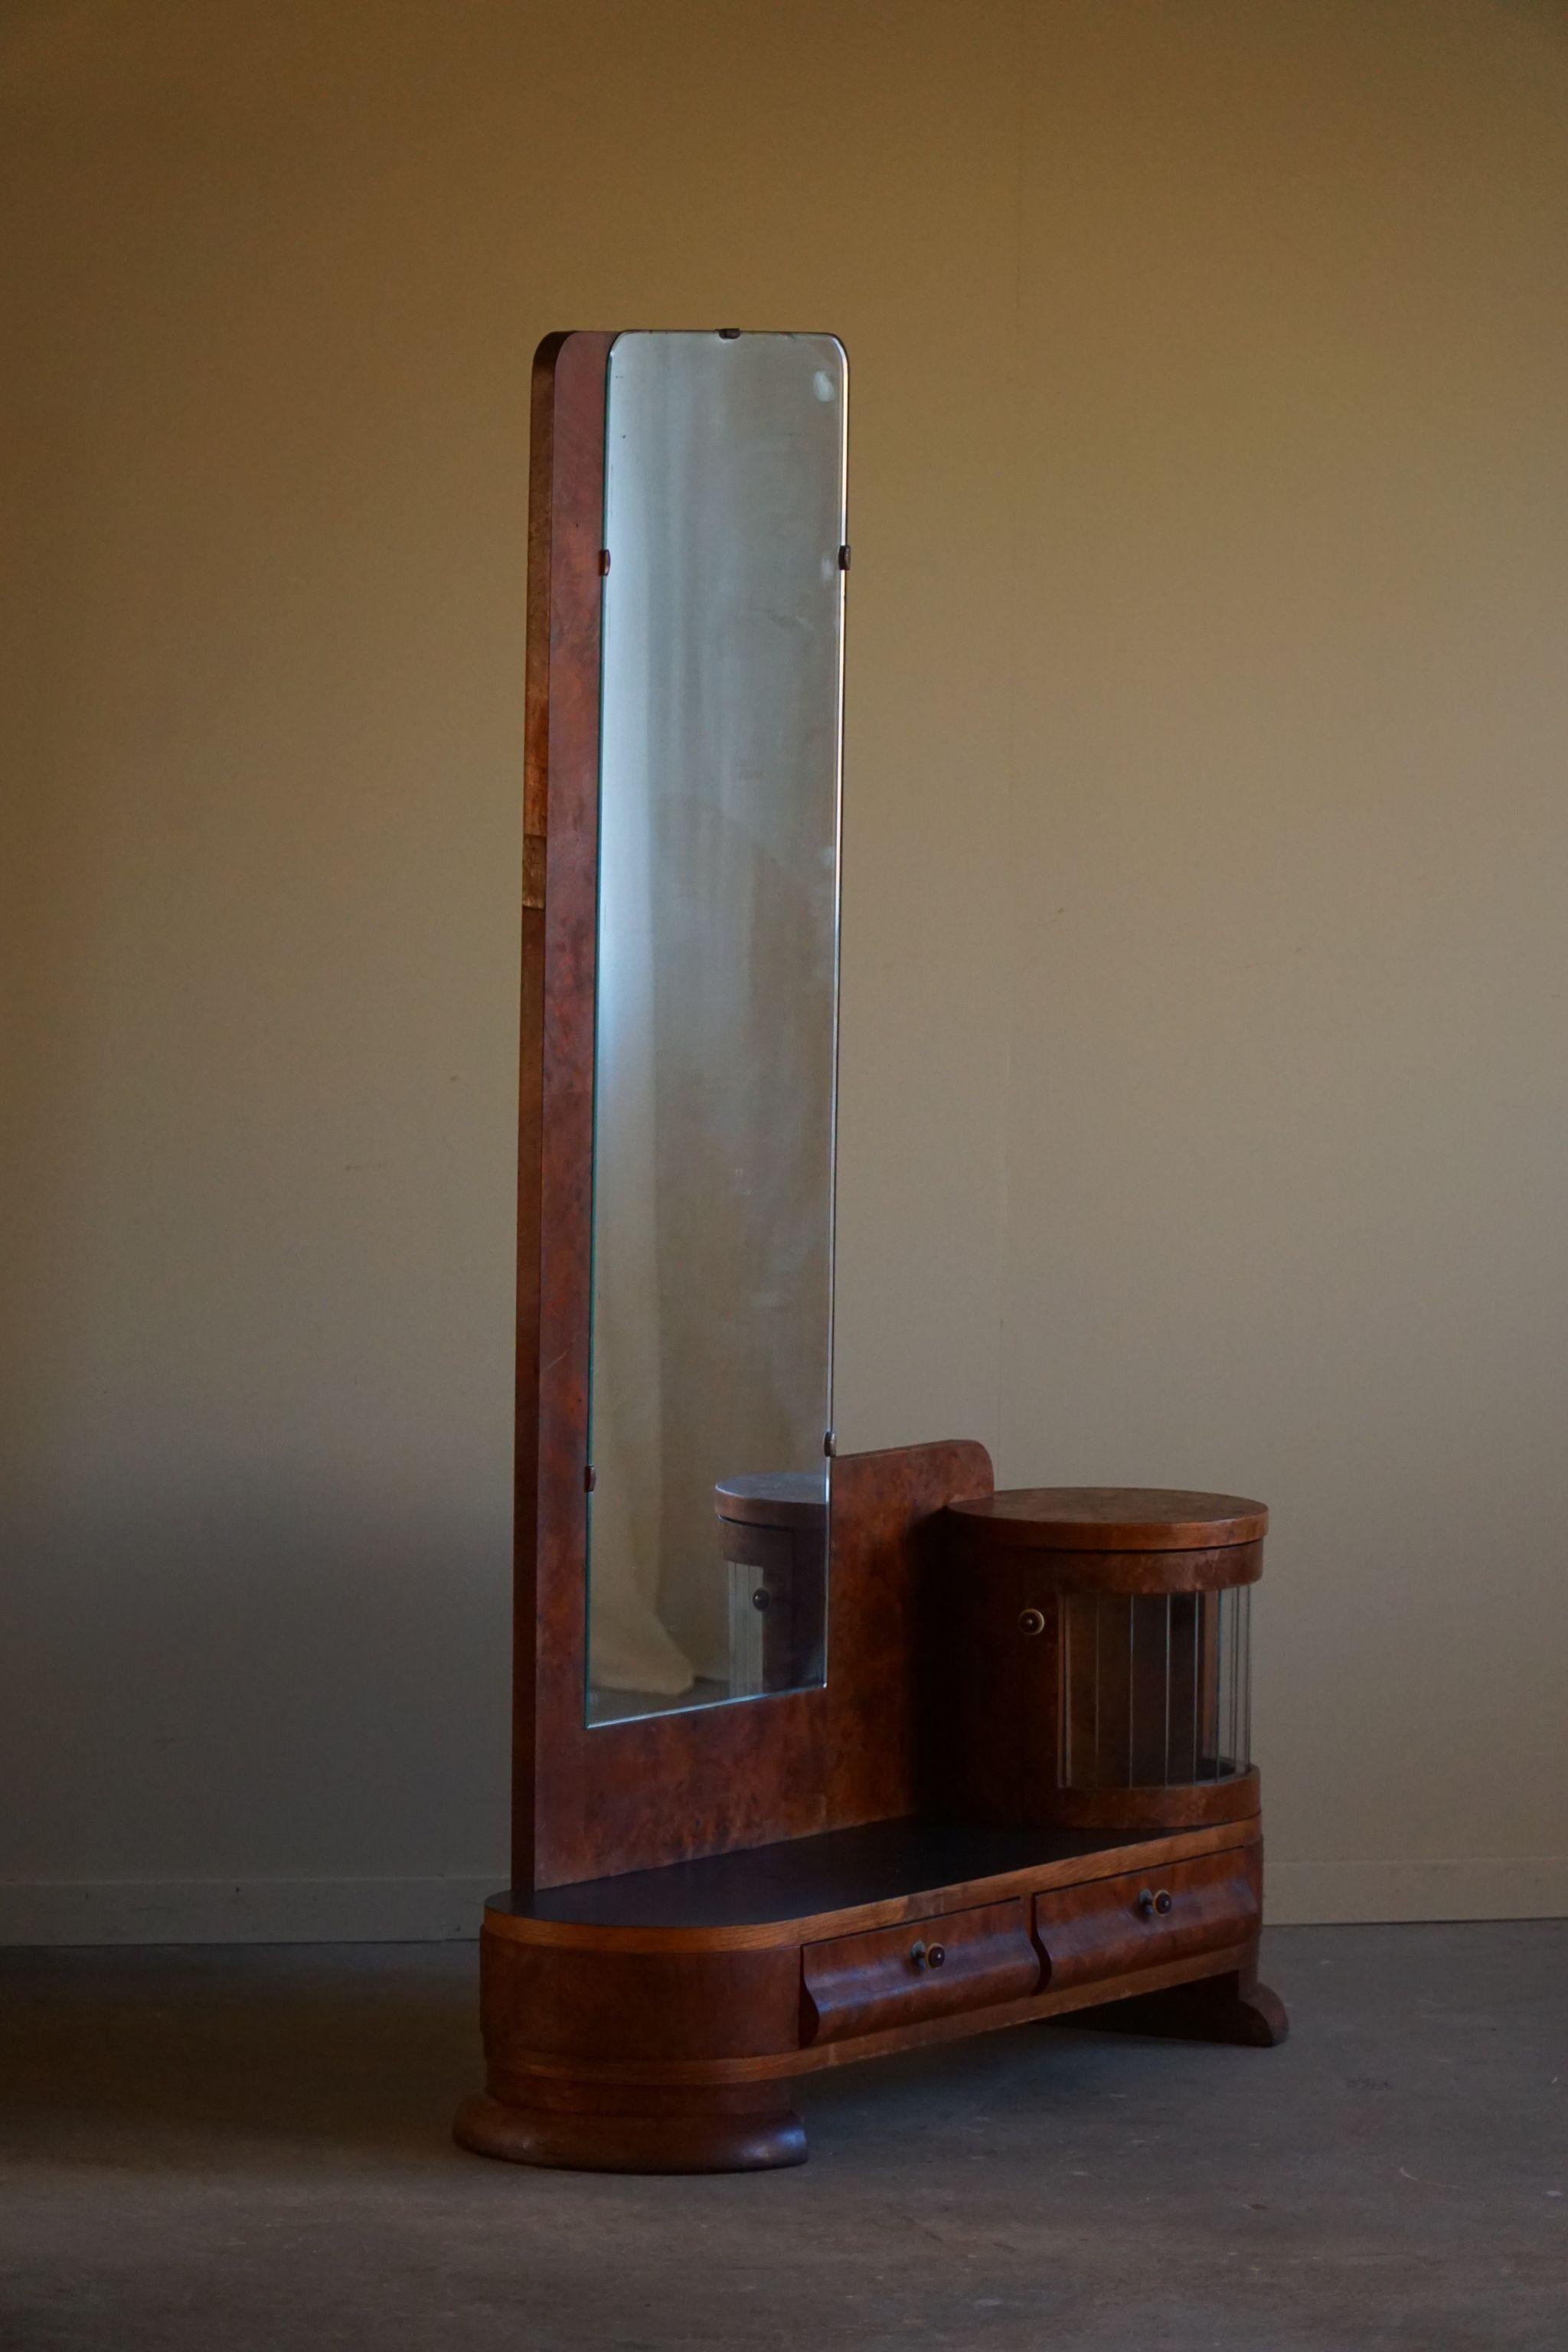 Danish Art Deco, Entry Console in Walnut with Mirror, Early 20th Century For Sale 1